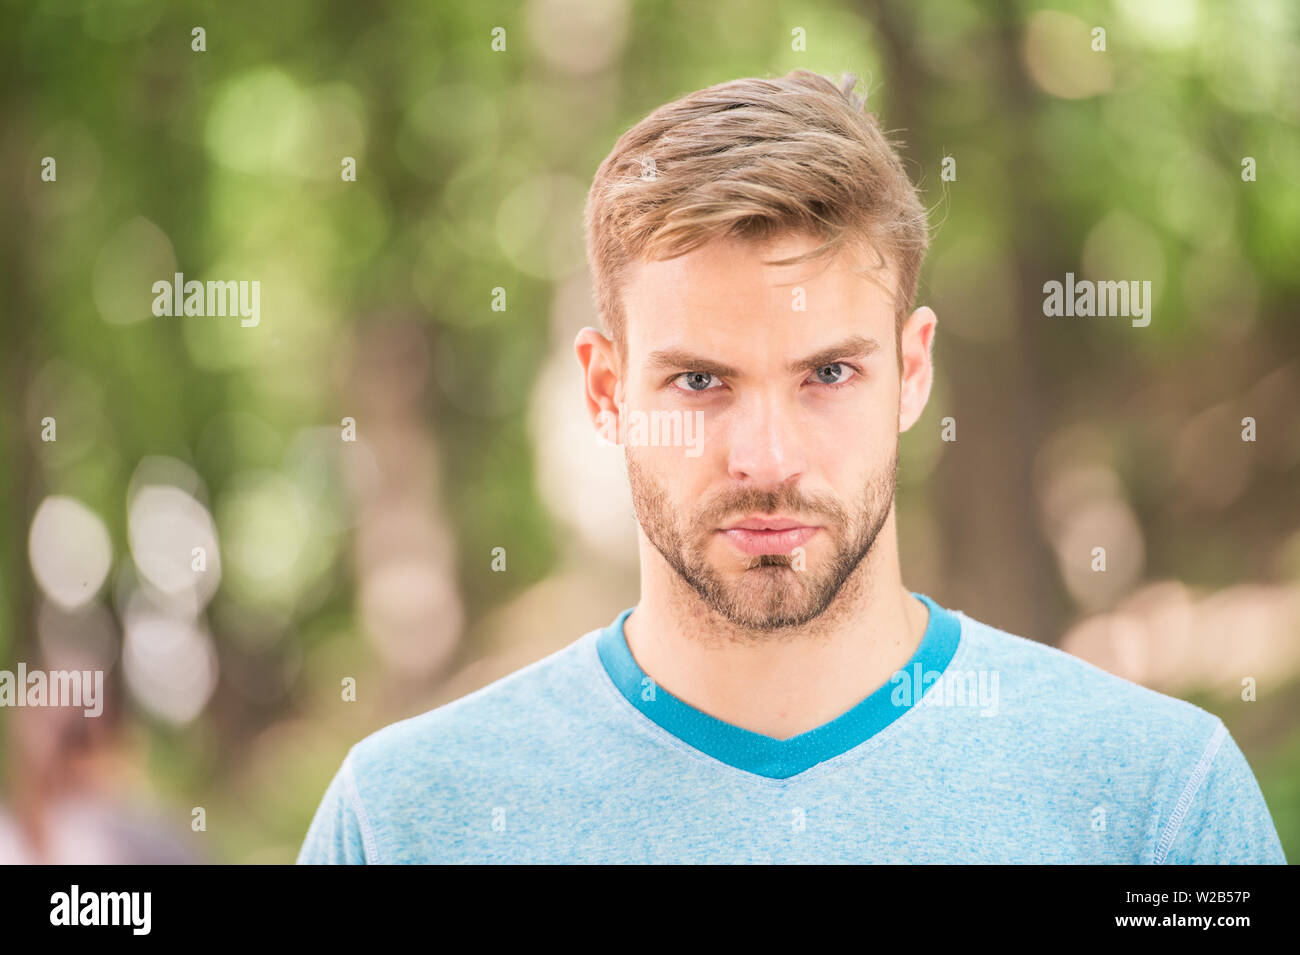 Charming Confidence Blond Man Man With Unshaved Mustache And Beard Hair With Stylish Haircut Handsome Man In Casual Tshirt On Blurred Natural Background Caucasian Man On Summer Day Stock Photo Alamy